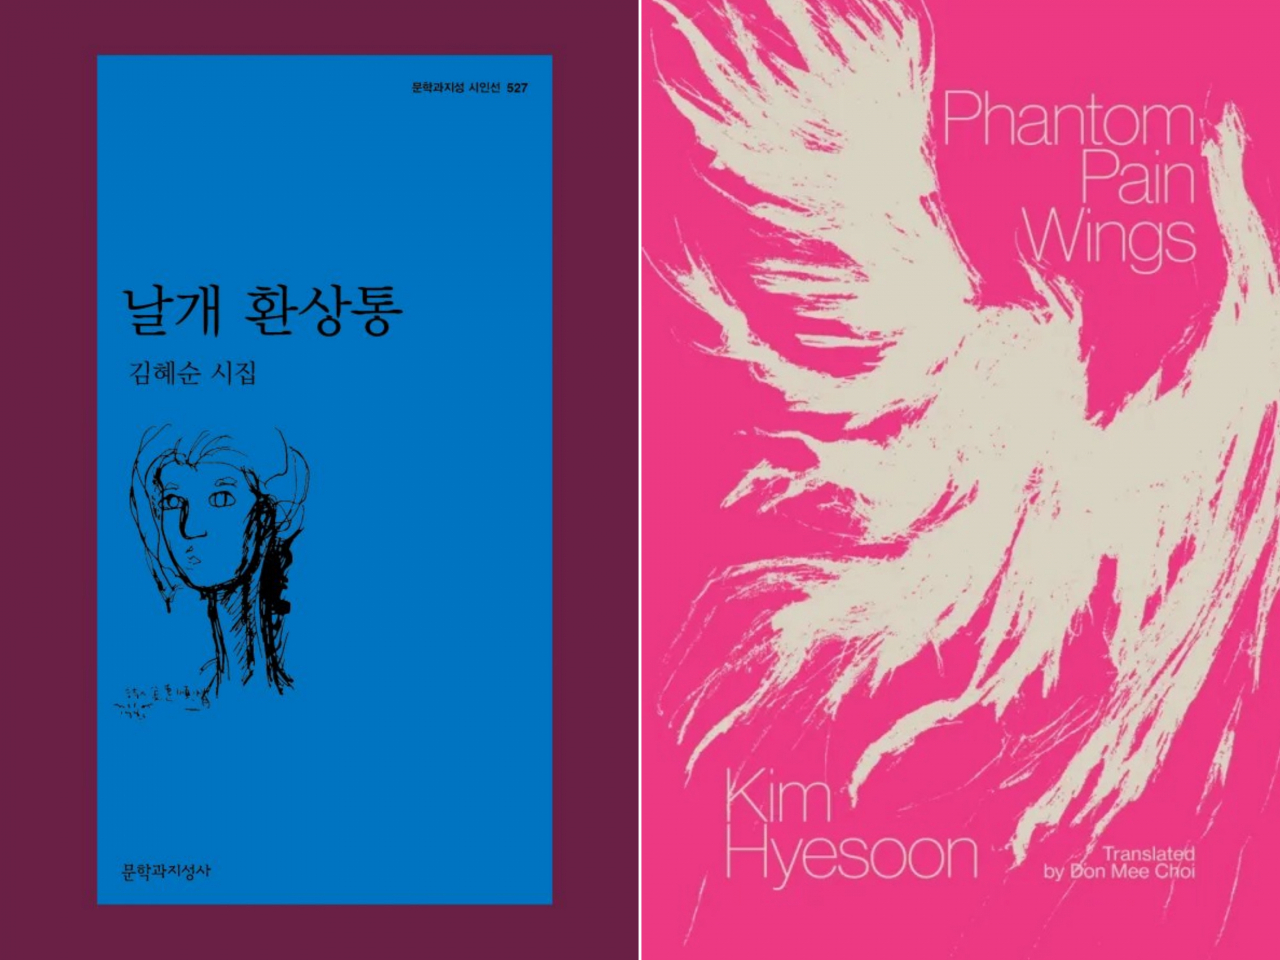 Korean edition (left) and English edition of "Phantom Pain Wings" by Kim Hye-soon, translated by Don Mee Choi (Moonji Publishing, New Directions Publishing)